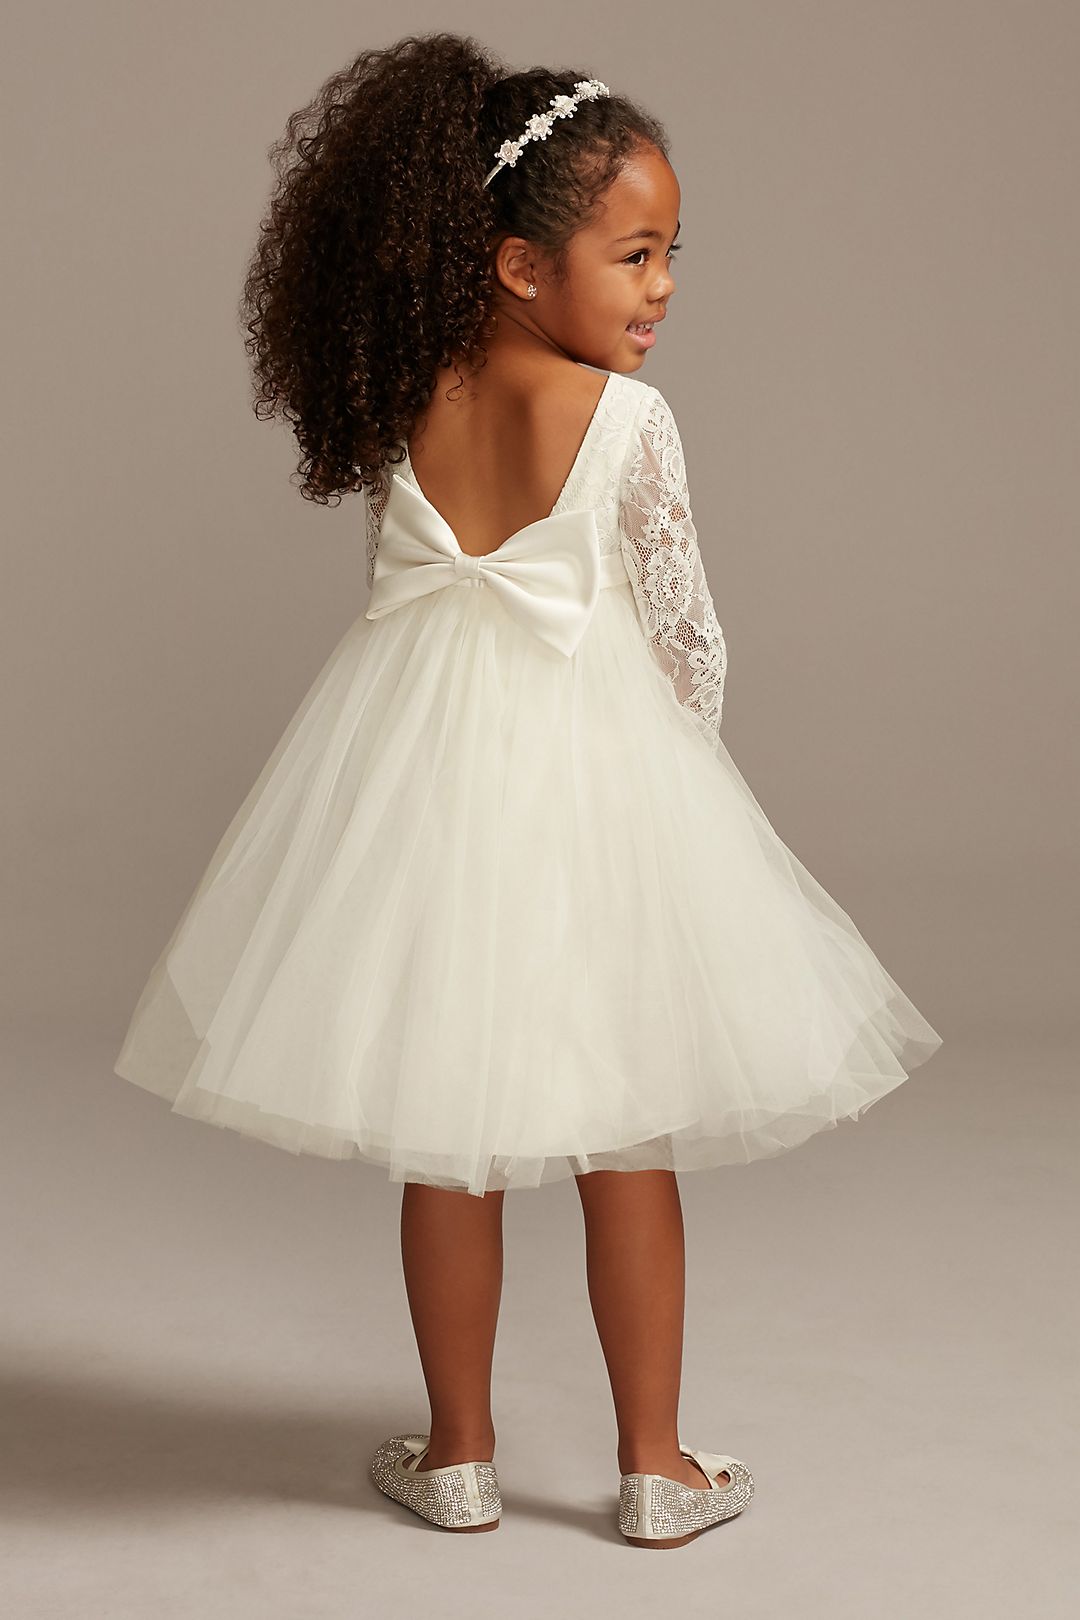 flower girl dress ideas illusion lace sleeves with bow in back david's bridal